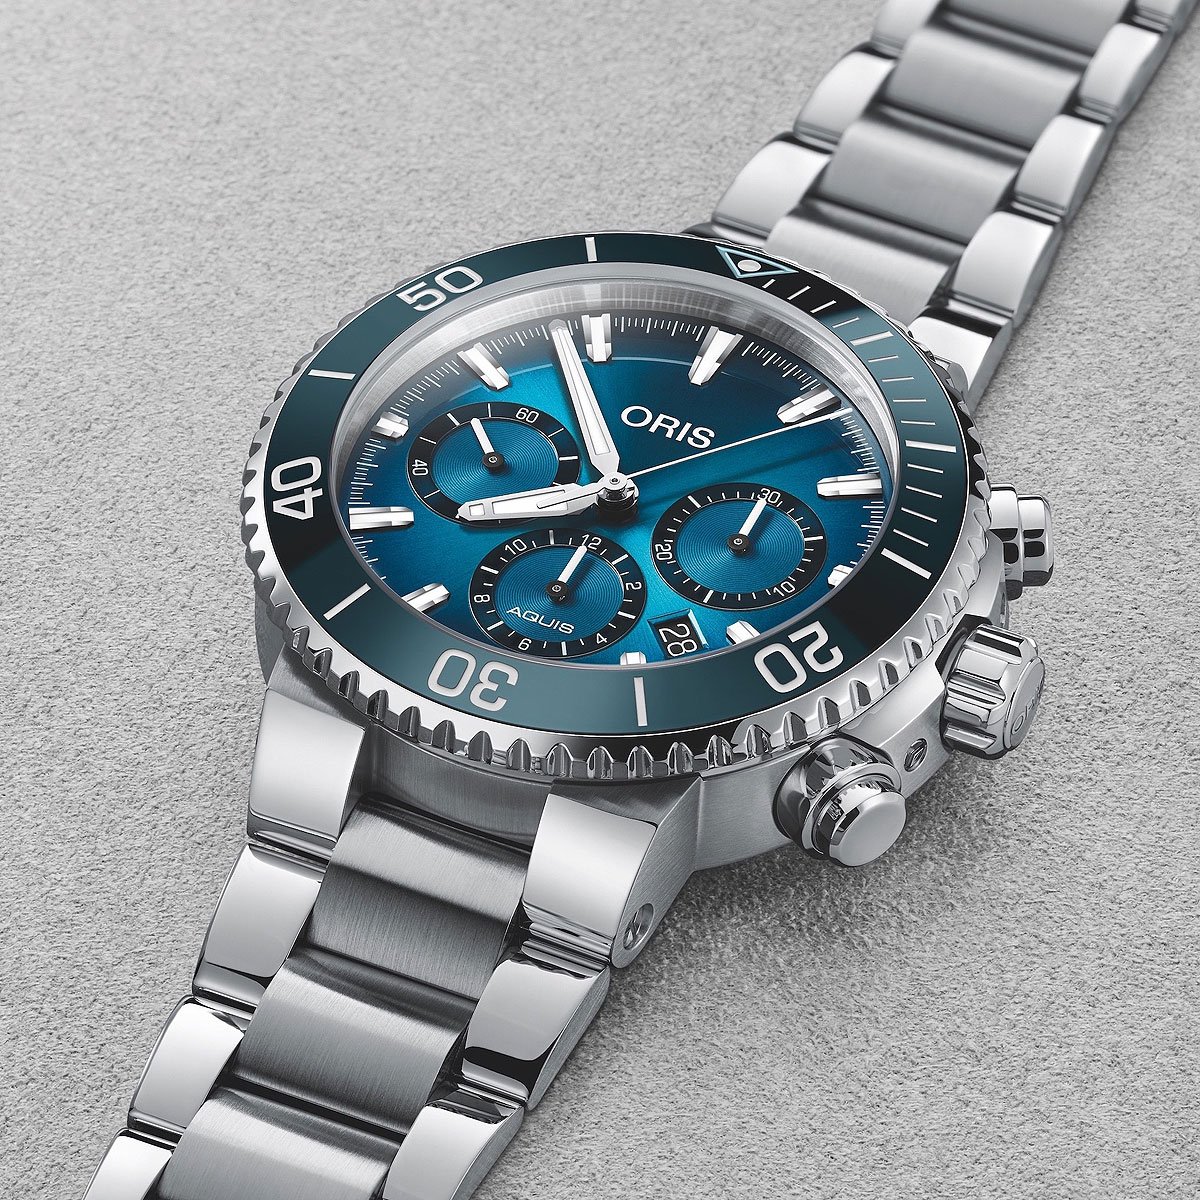 The Watch of Wall Street: Top Dive Watches of 2019, CSQ